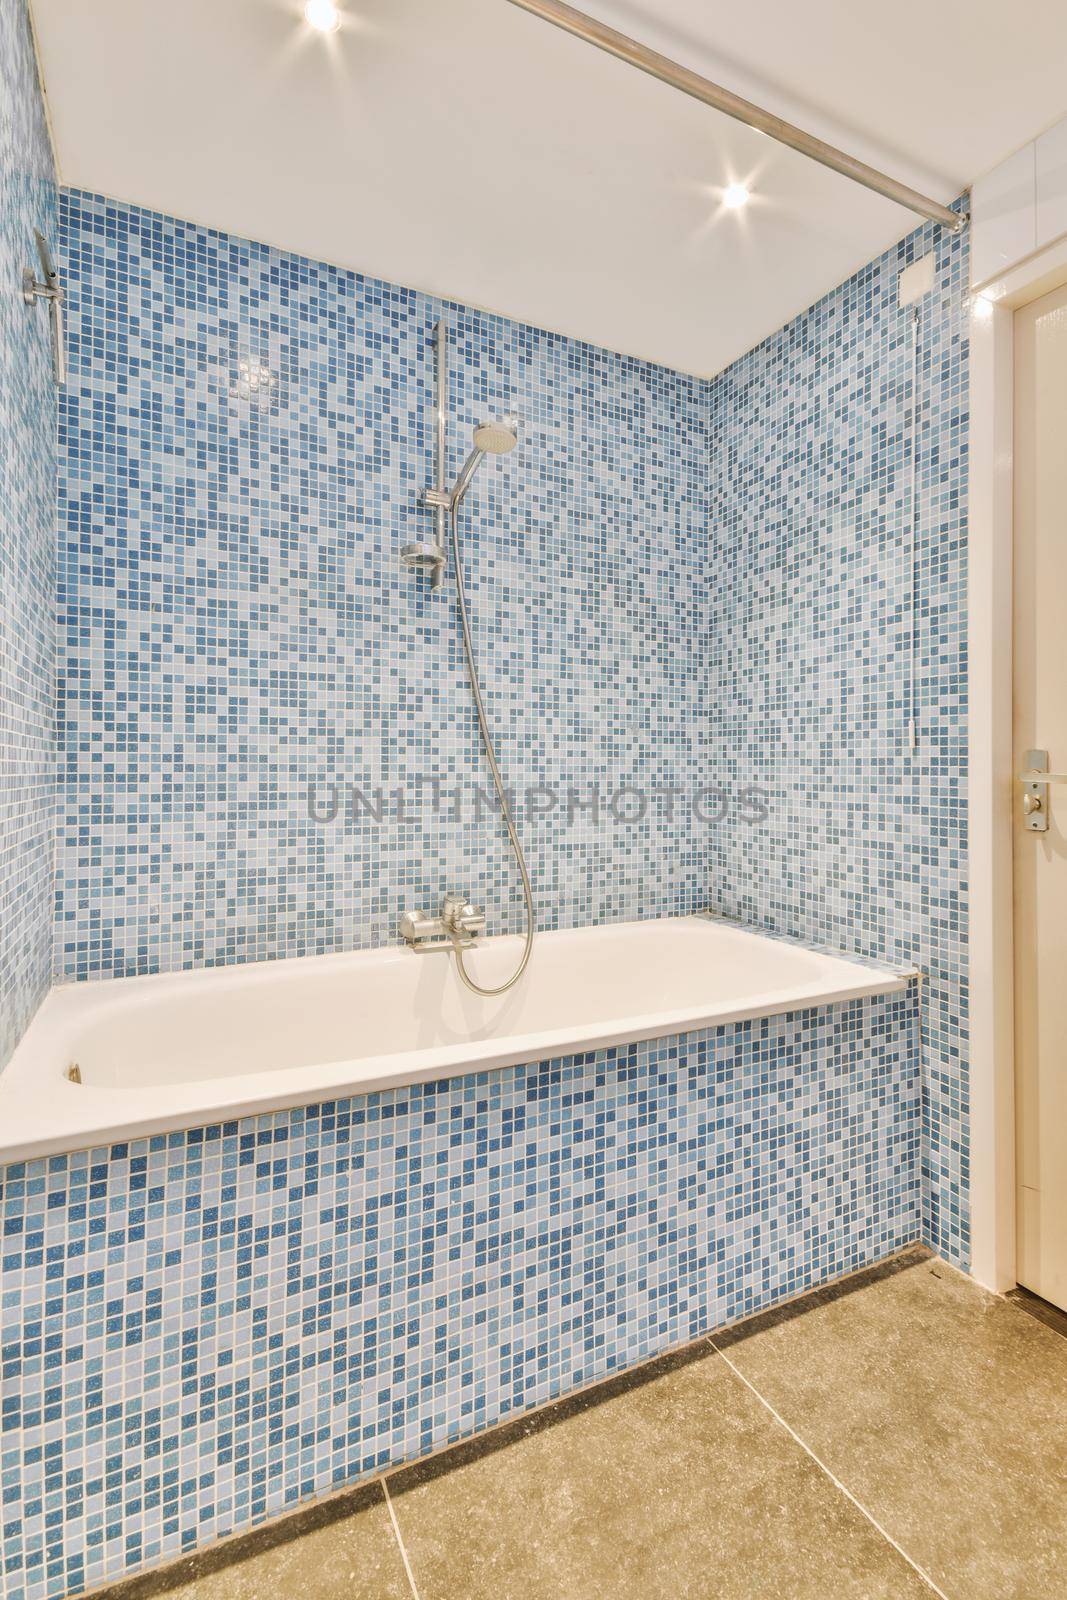 Small bedroom tiled with blue tiles in the form of a mosaic in a modern house